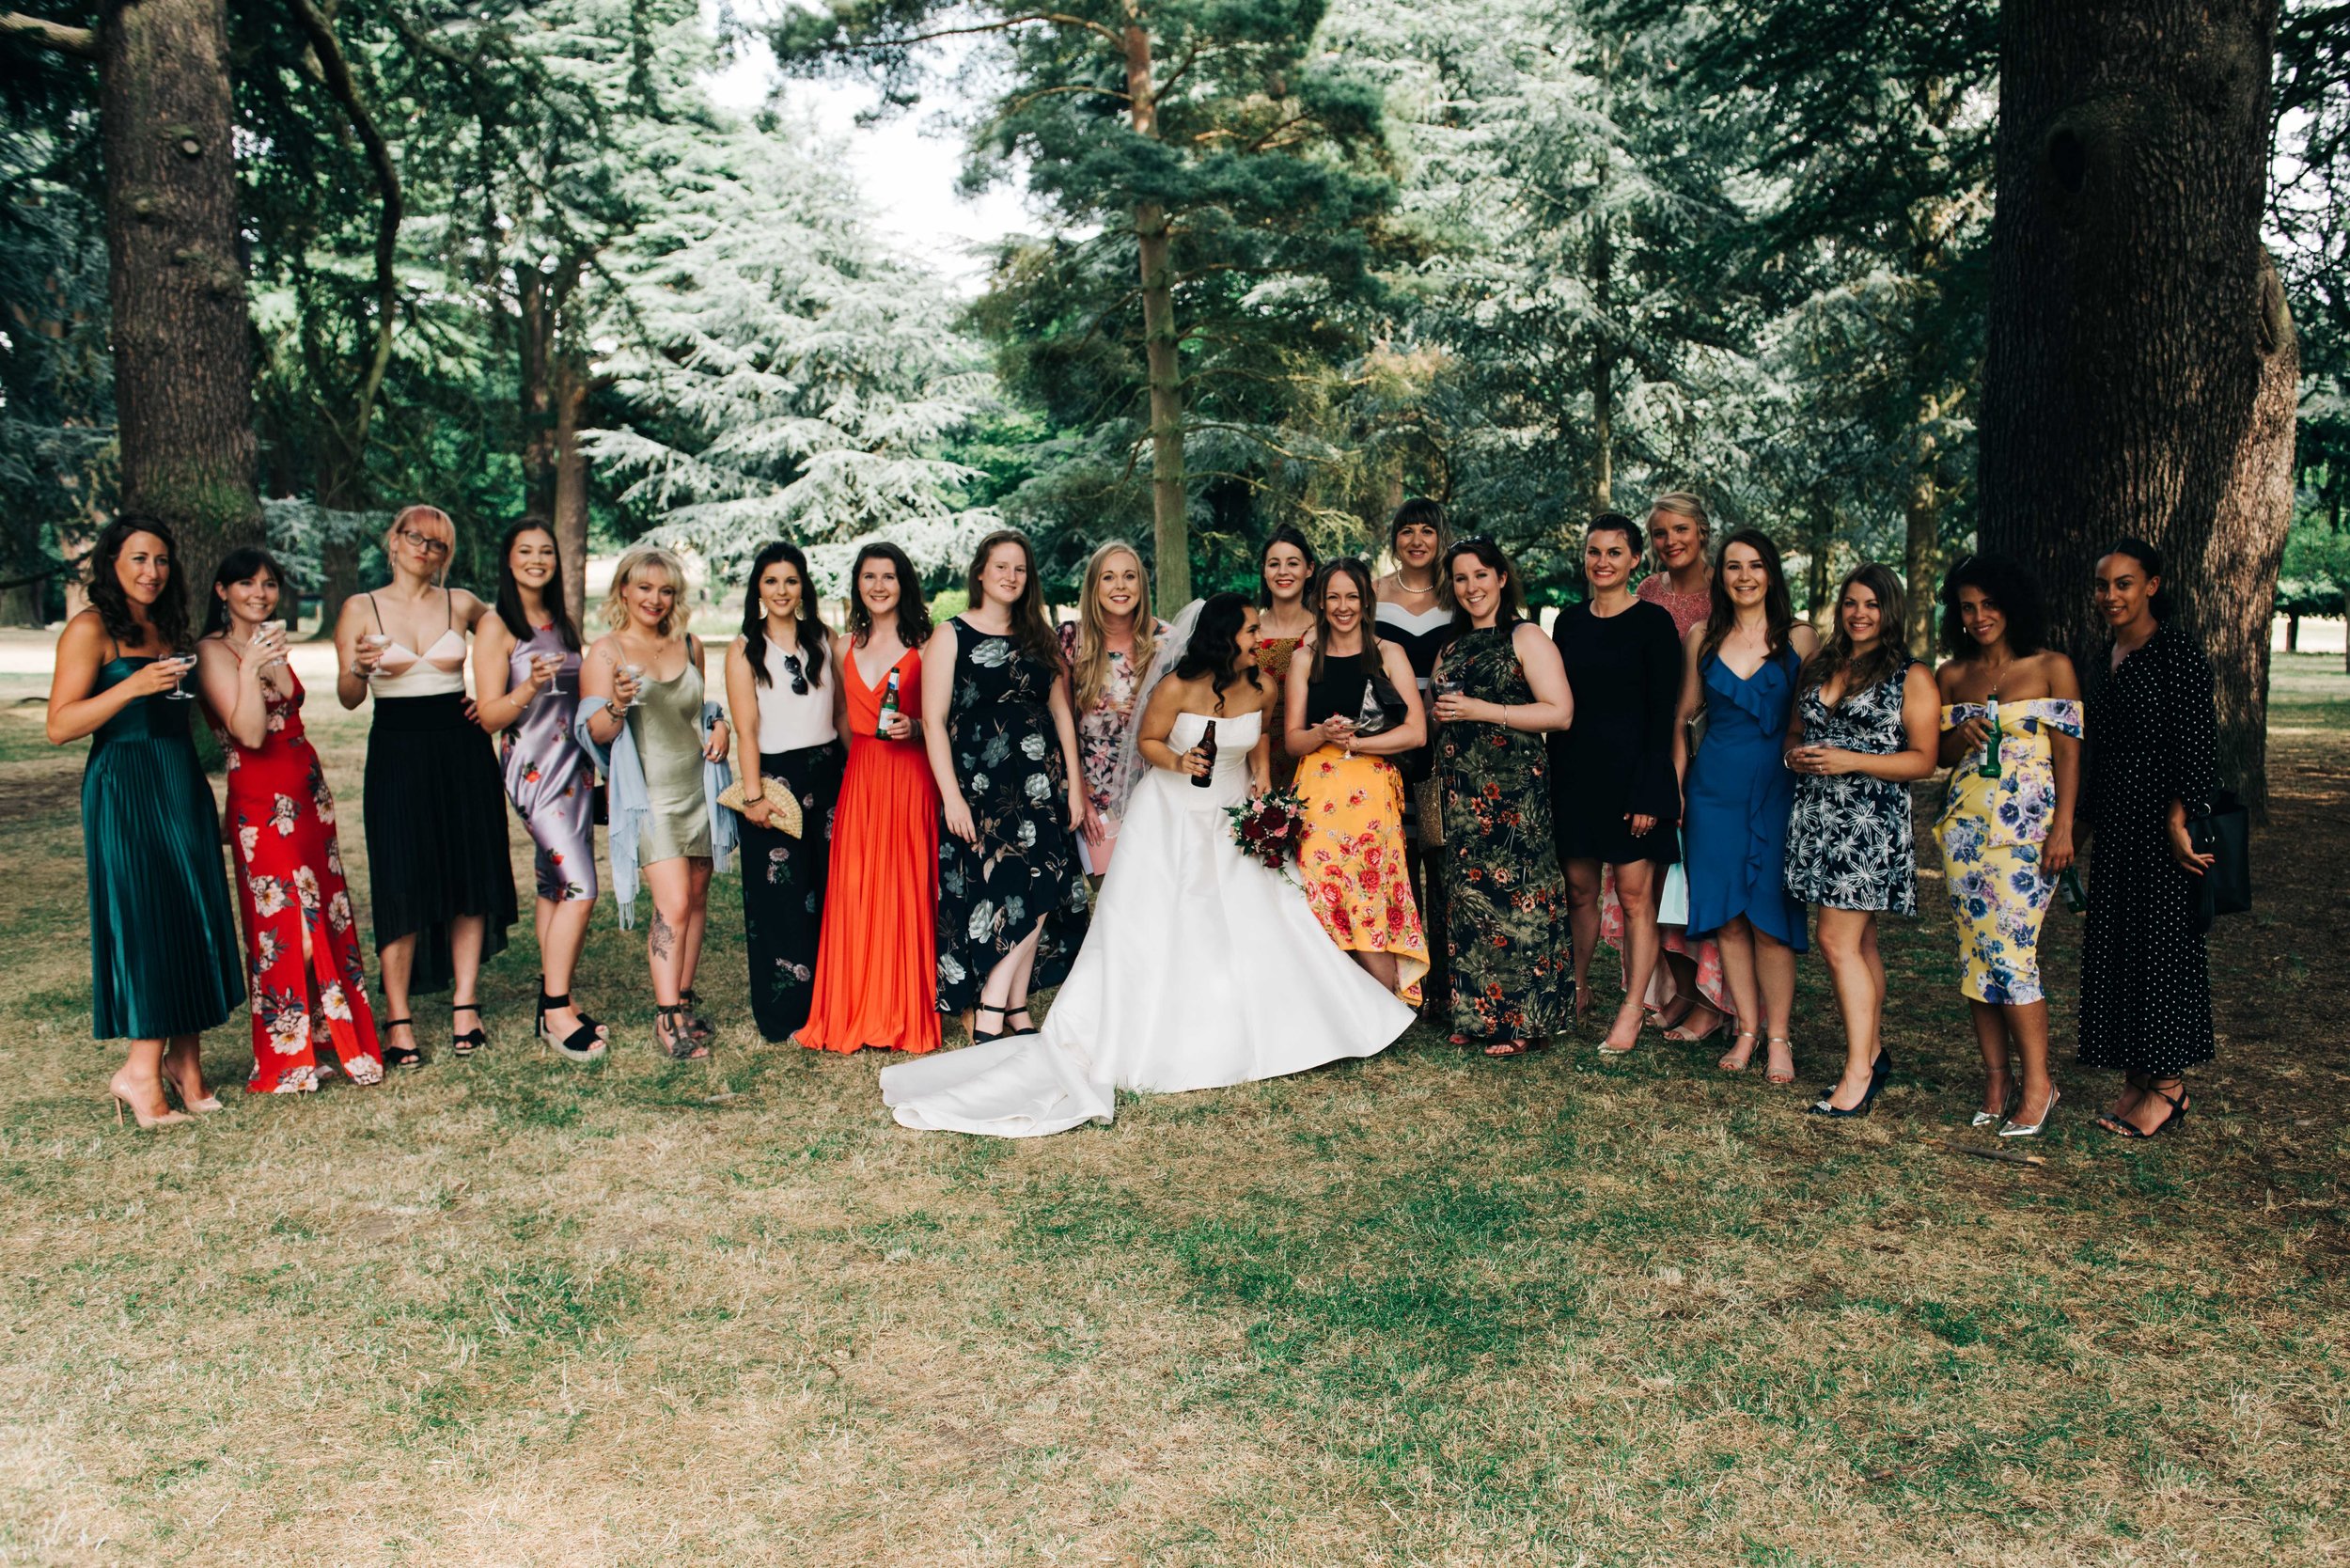 Wollaton Hall Gardens, Nottingham. Sophie and her ladies. Coales Capture Wedding Photography 